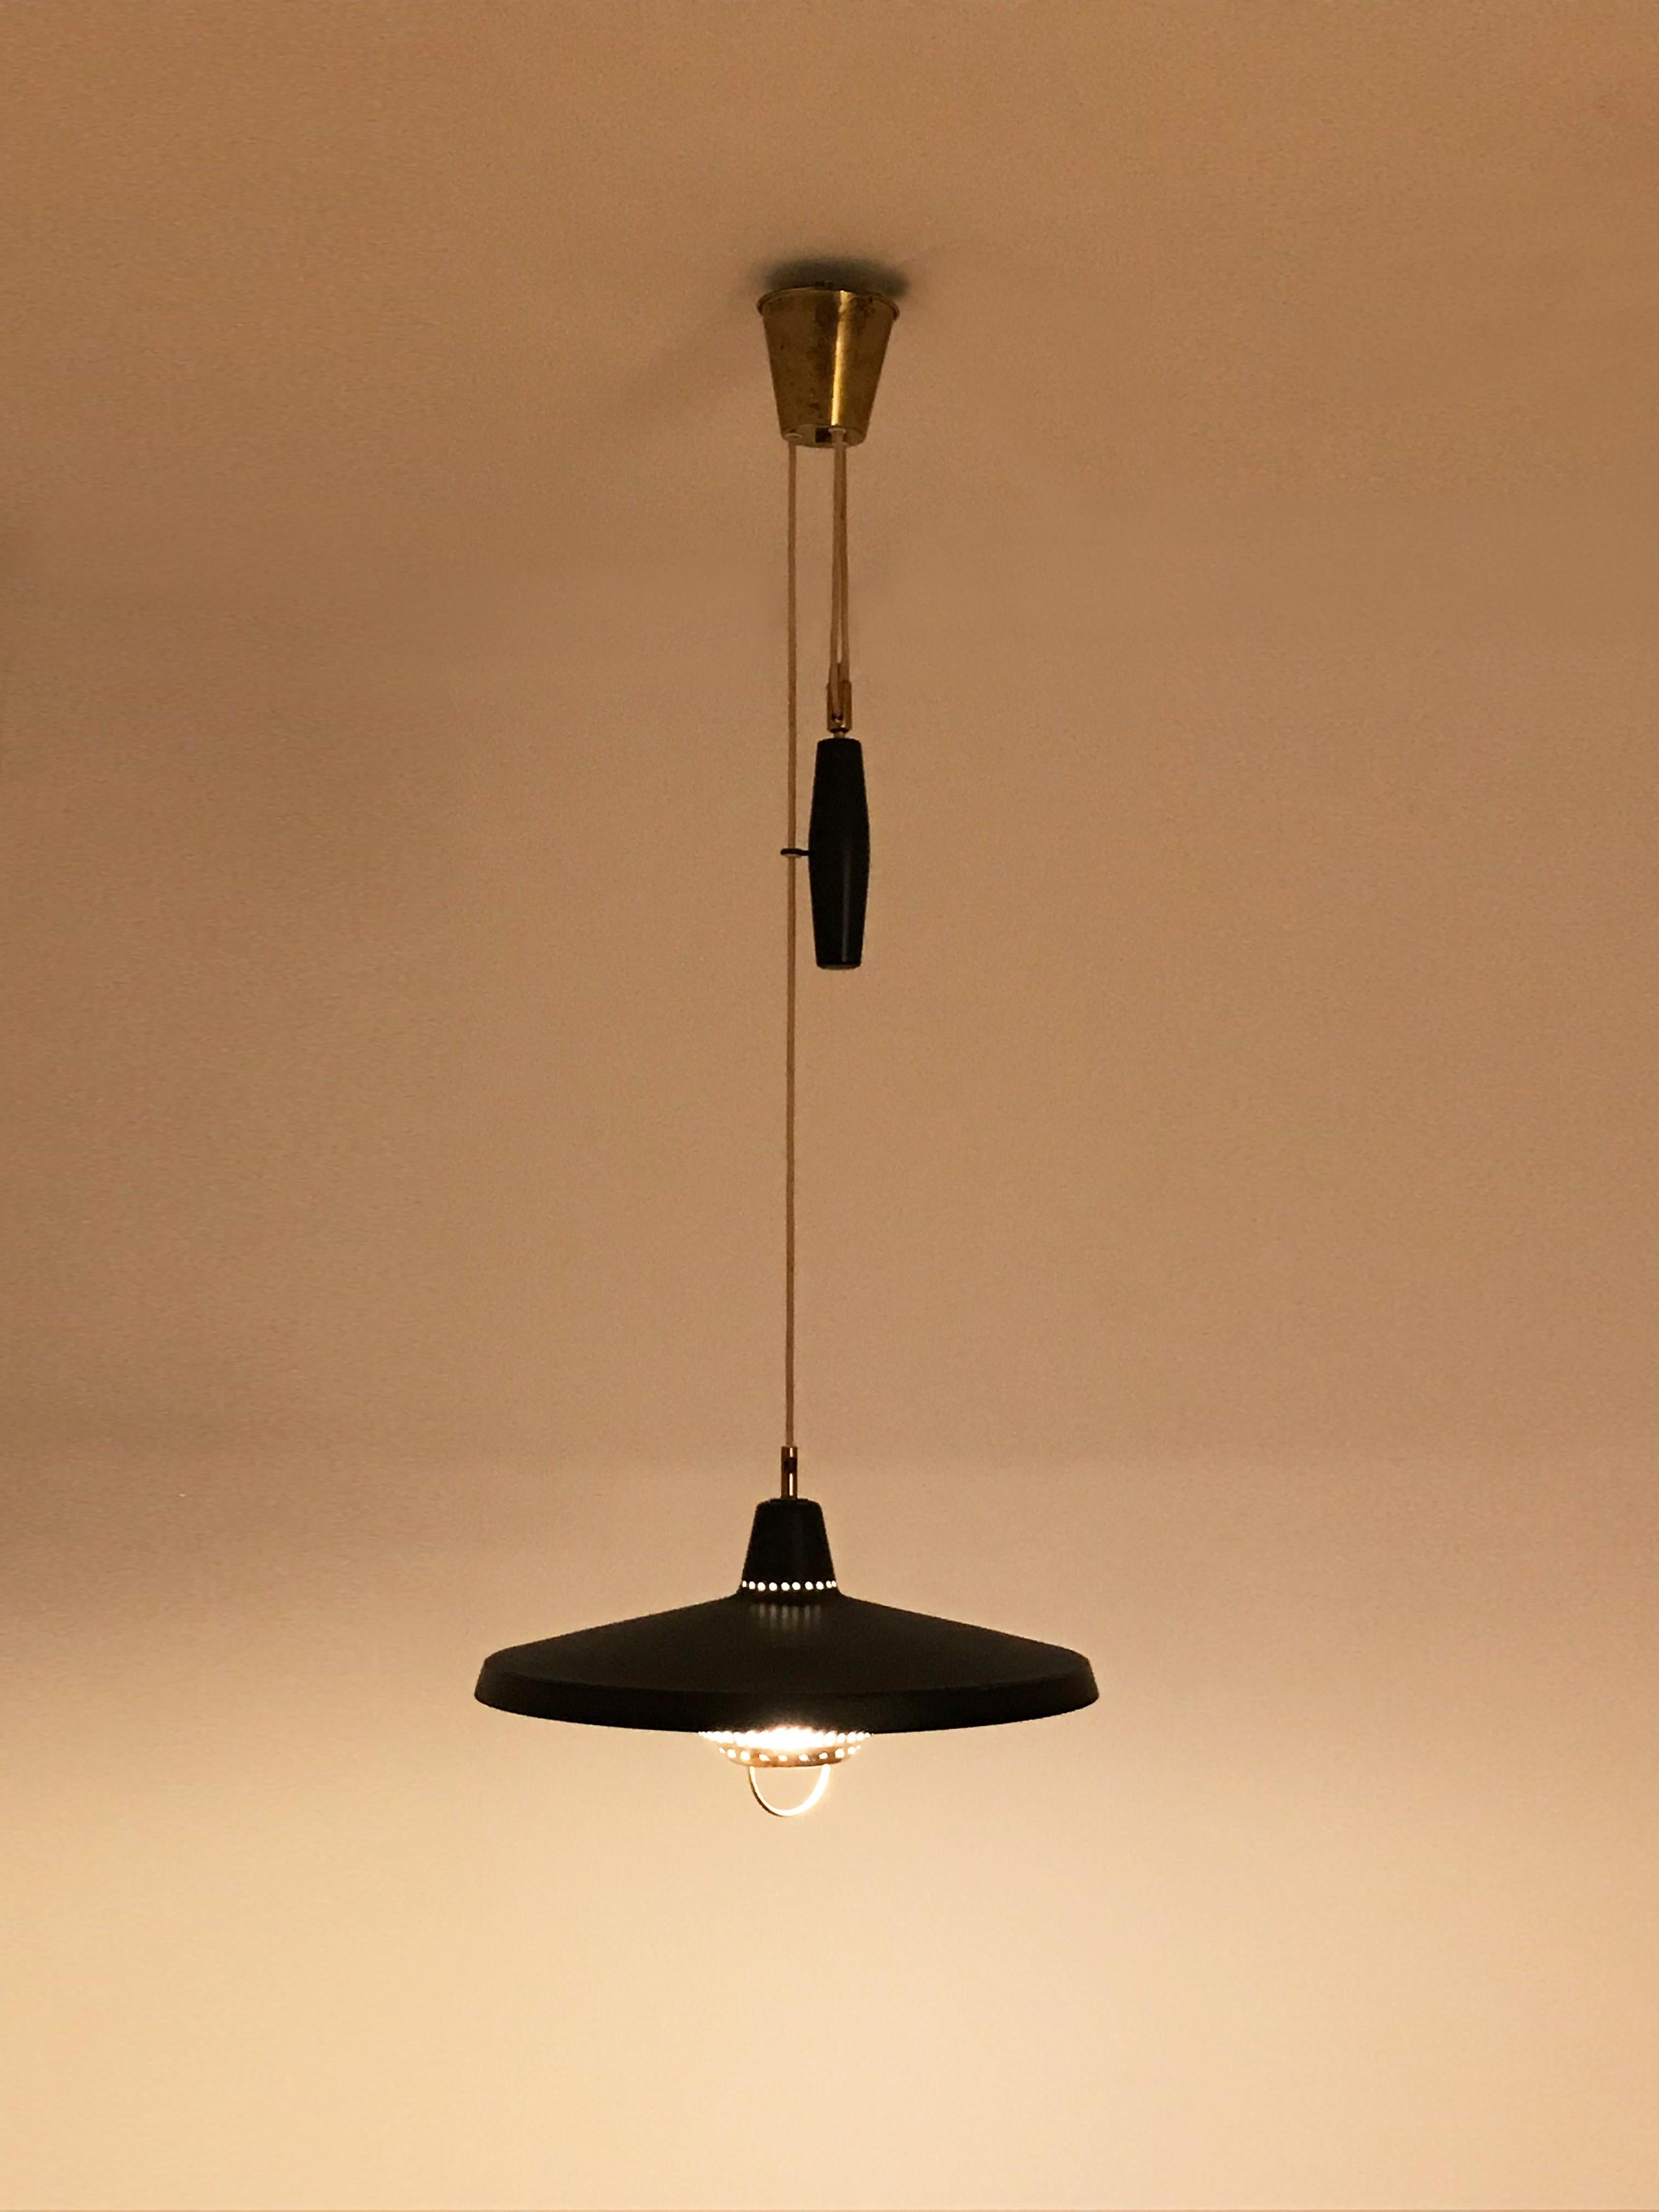 Very beautiful adjustable Swedish pendant lamp with black lacquered shade and brass elements, designed by Hans-Agne Jakobsson for Markaryd in the 1960s.
In a great original condition with manufacturer's tag.